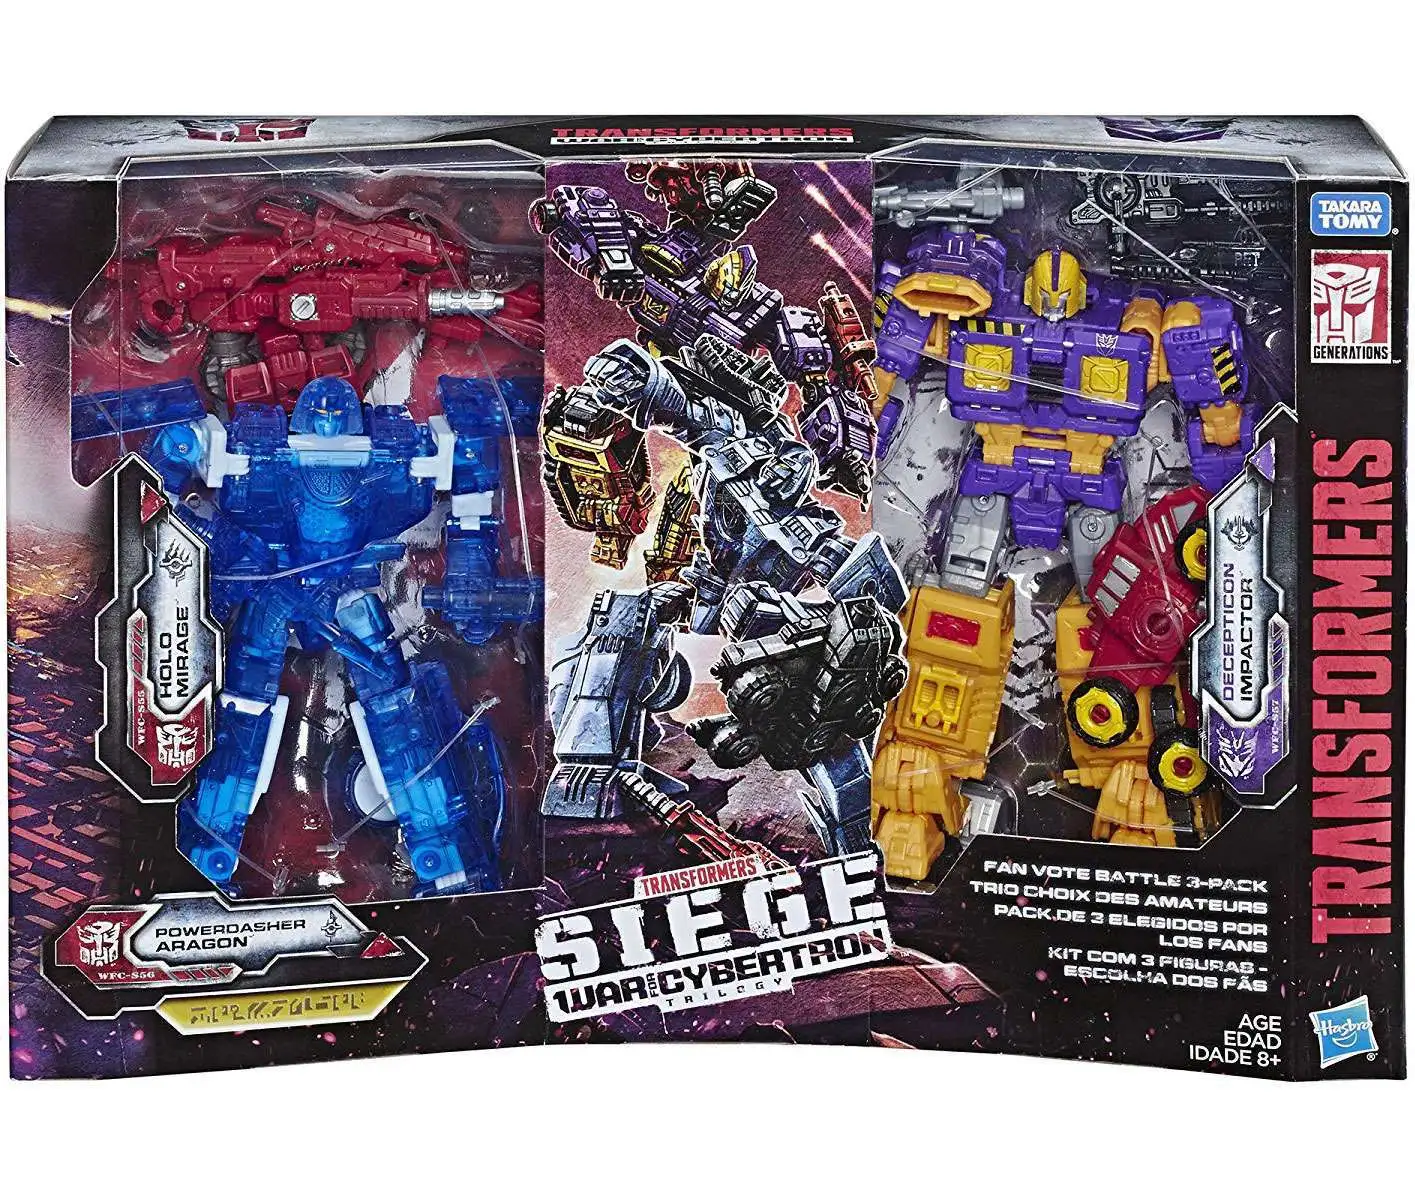 E9501 for sale online Hasbro Transformers War for Cybertron Trilogy 3-Pack Action Figure Set 